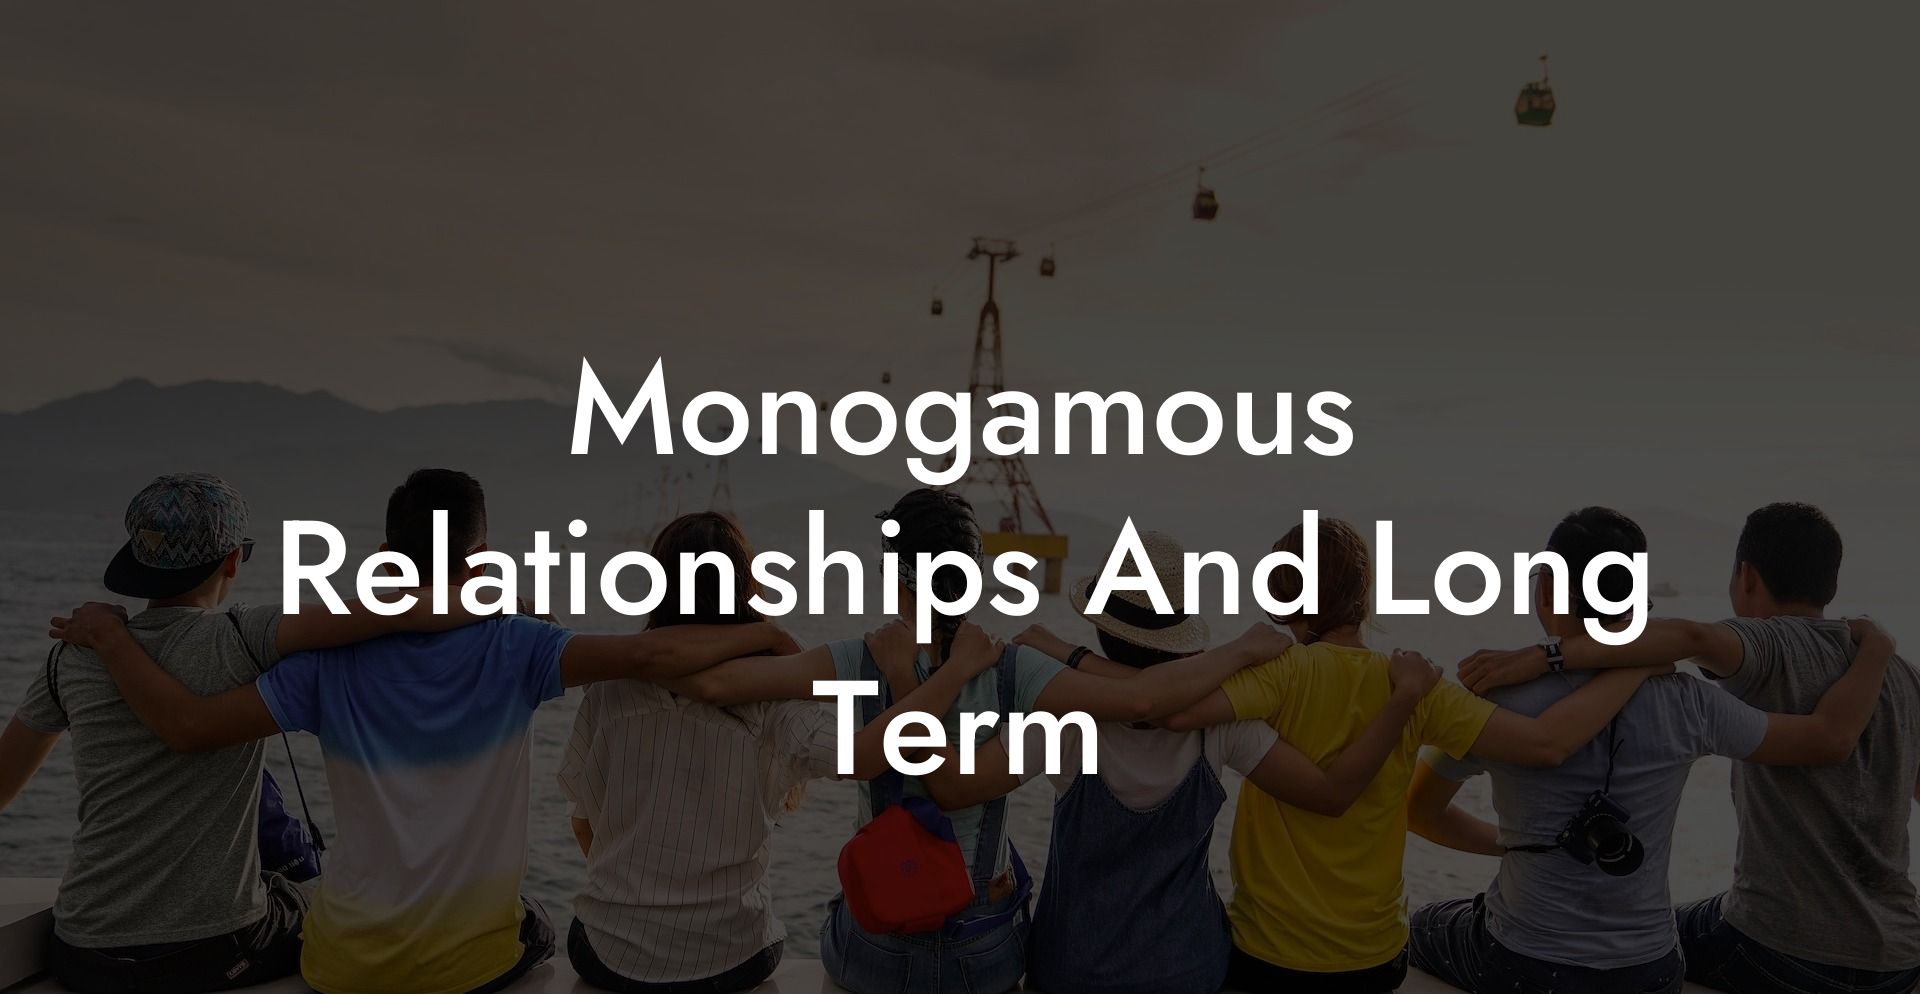 Monogamous Relationships And Long Term